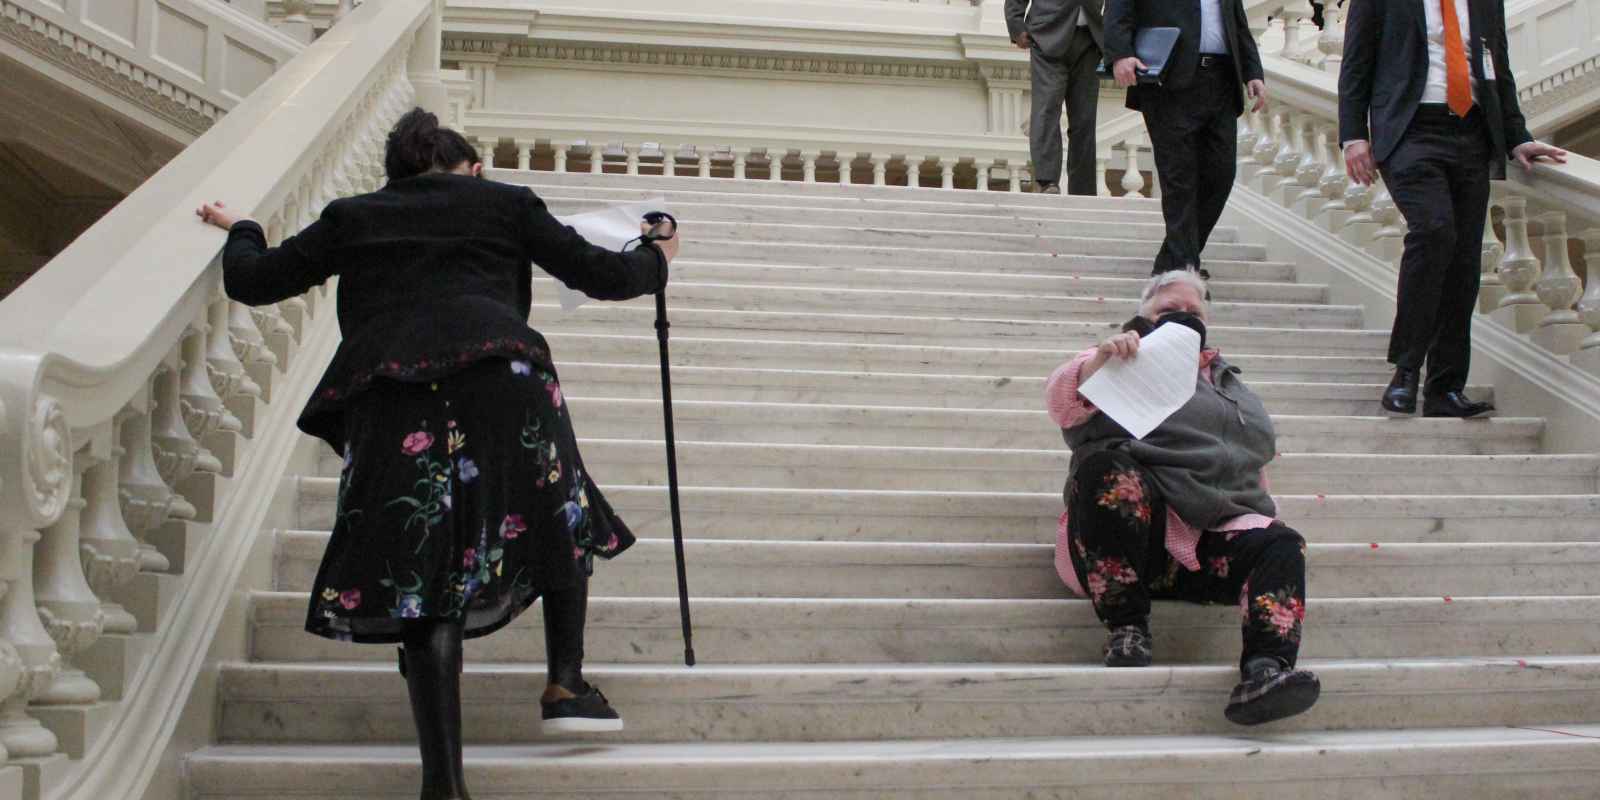 Coalition of people advocating for more disability rights in the state of Georgia